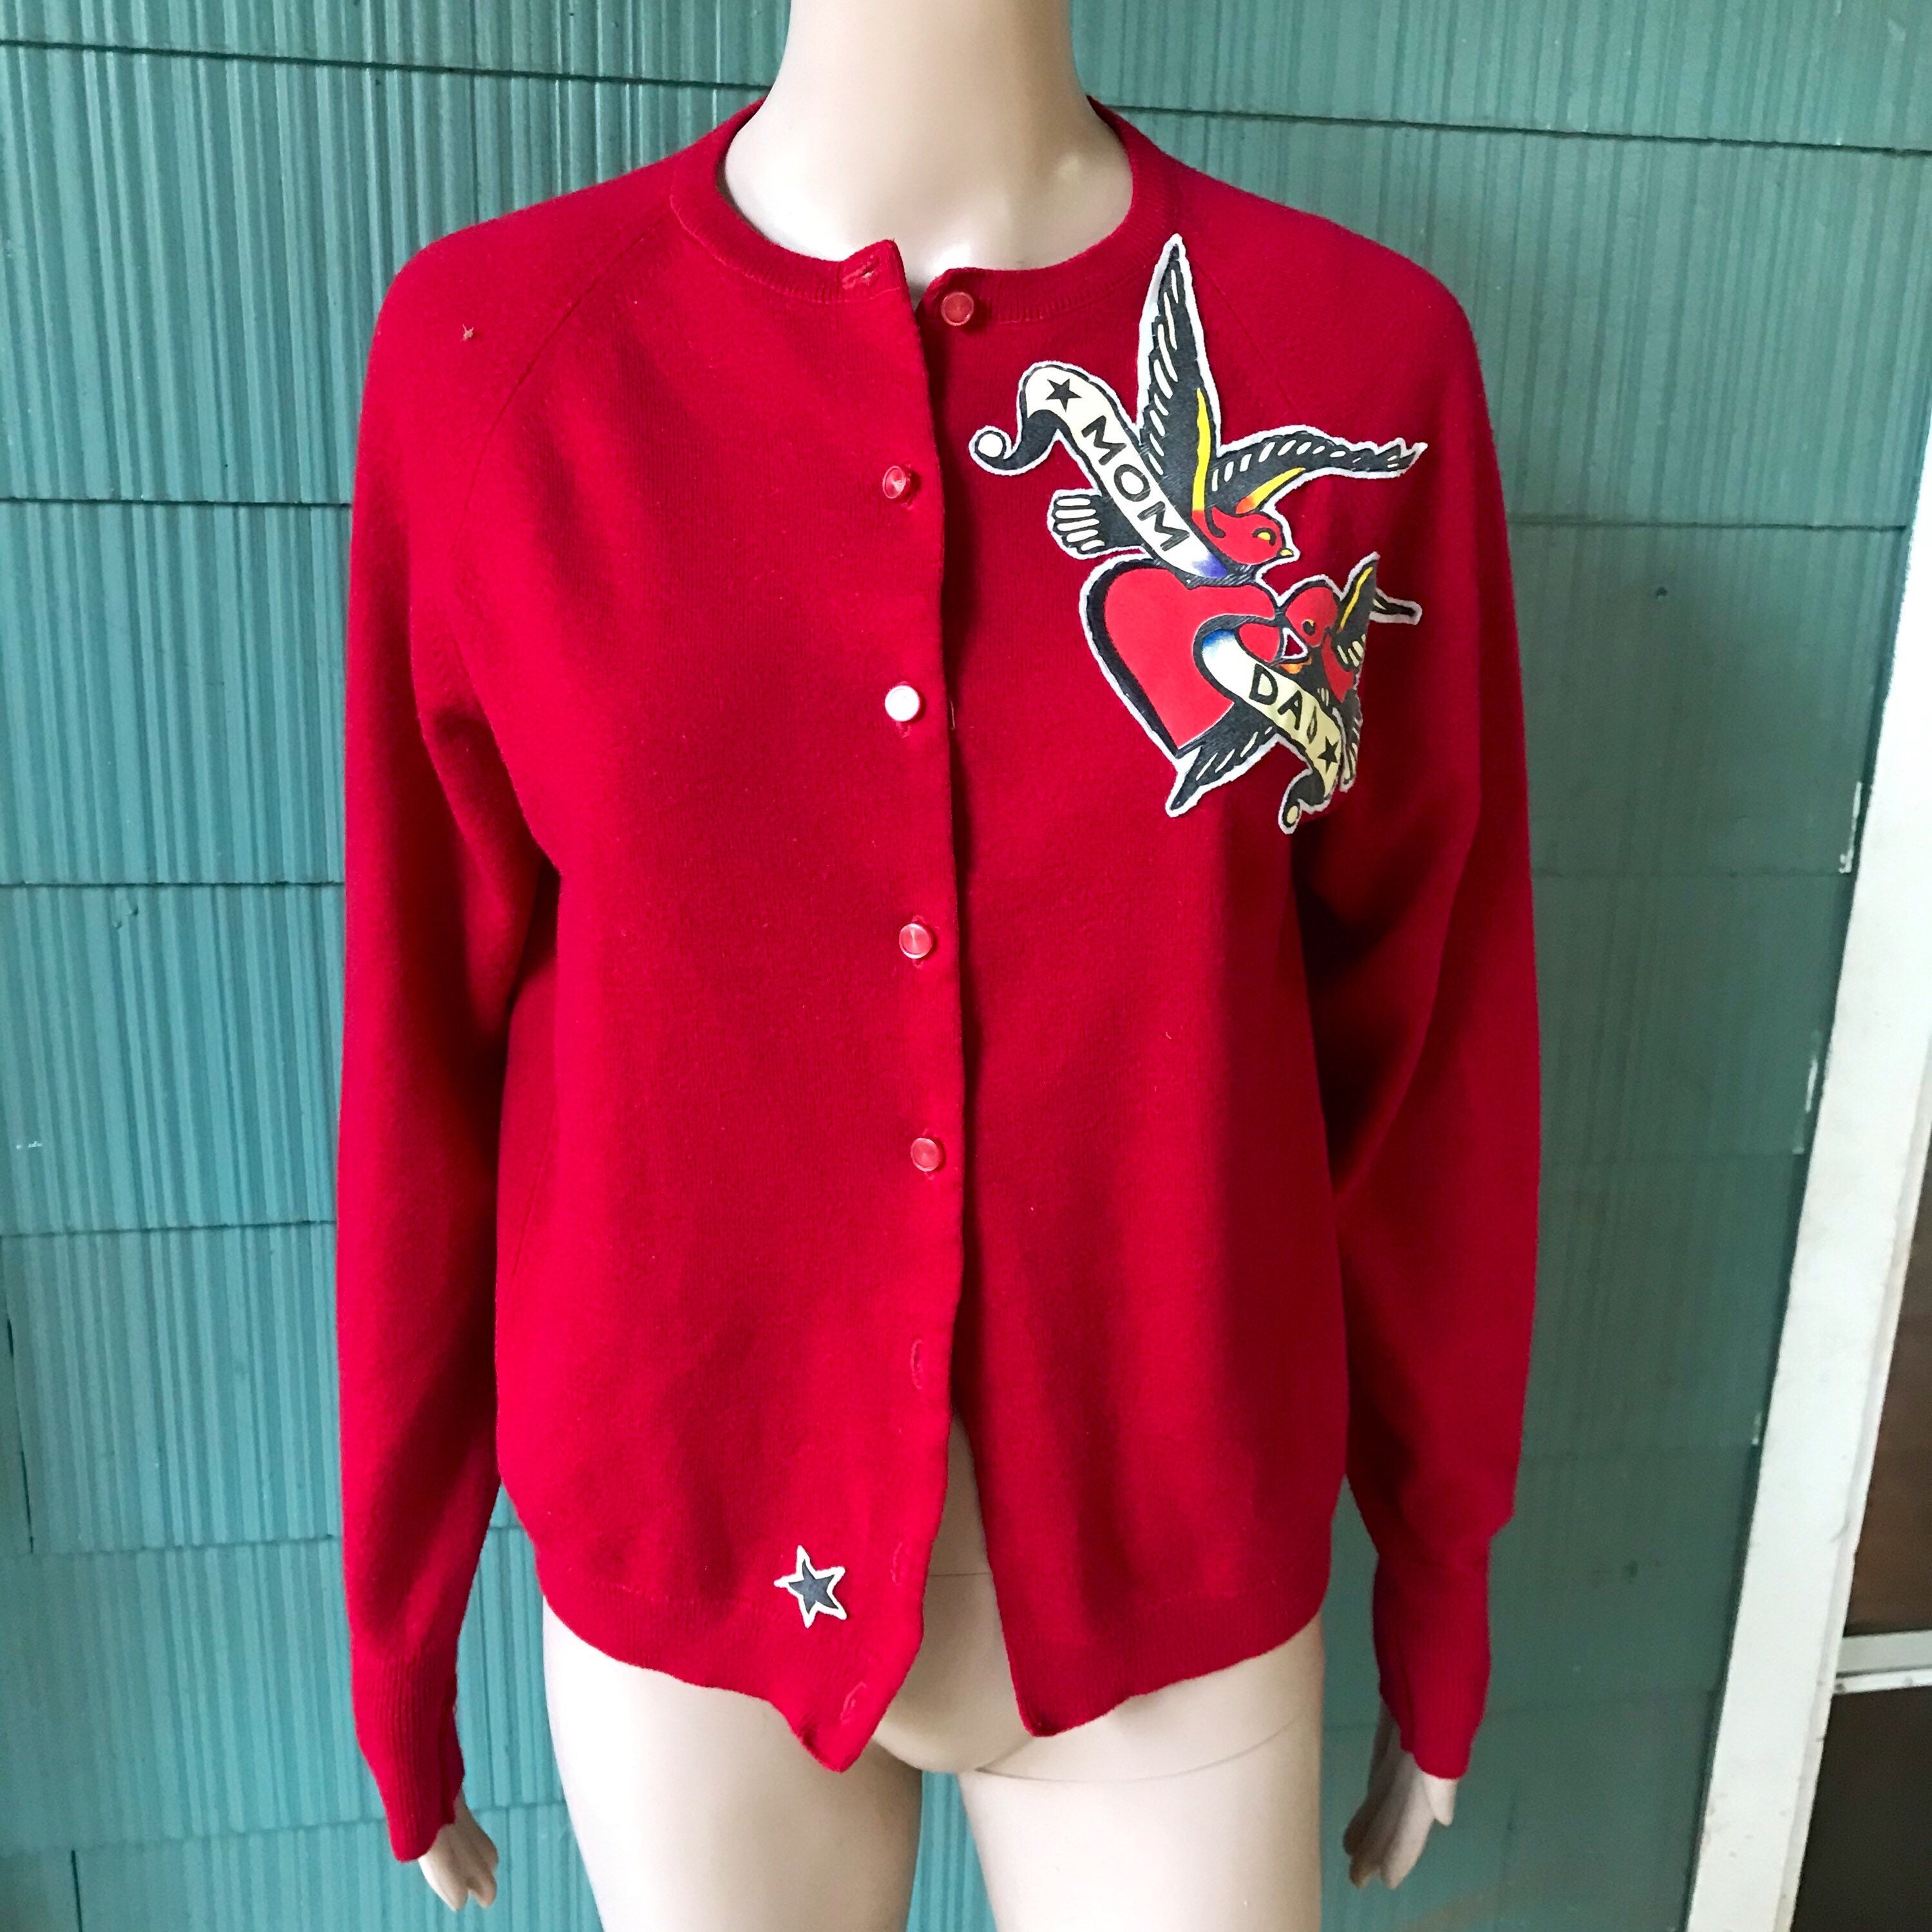 Vintage 50's Red Knit Wool Blend Mom & Dad Tattoo Design Patch Cardigan Sweater By Peggy's Pride Size Medium